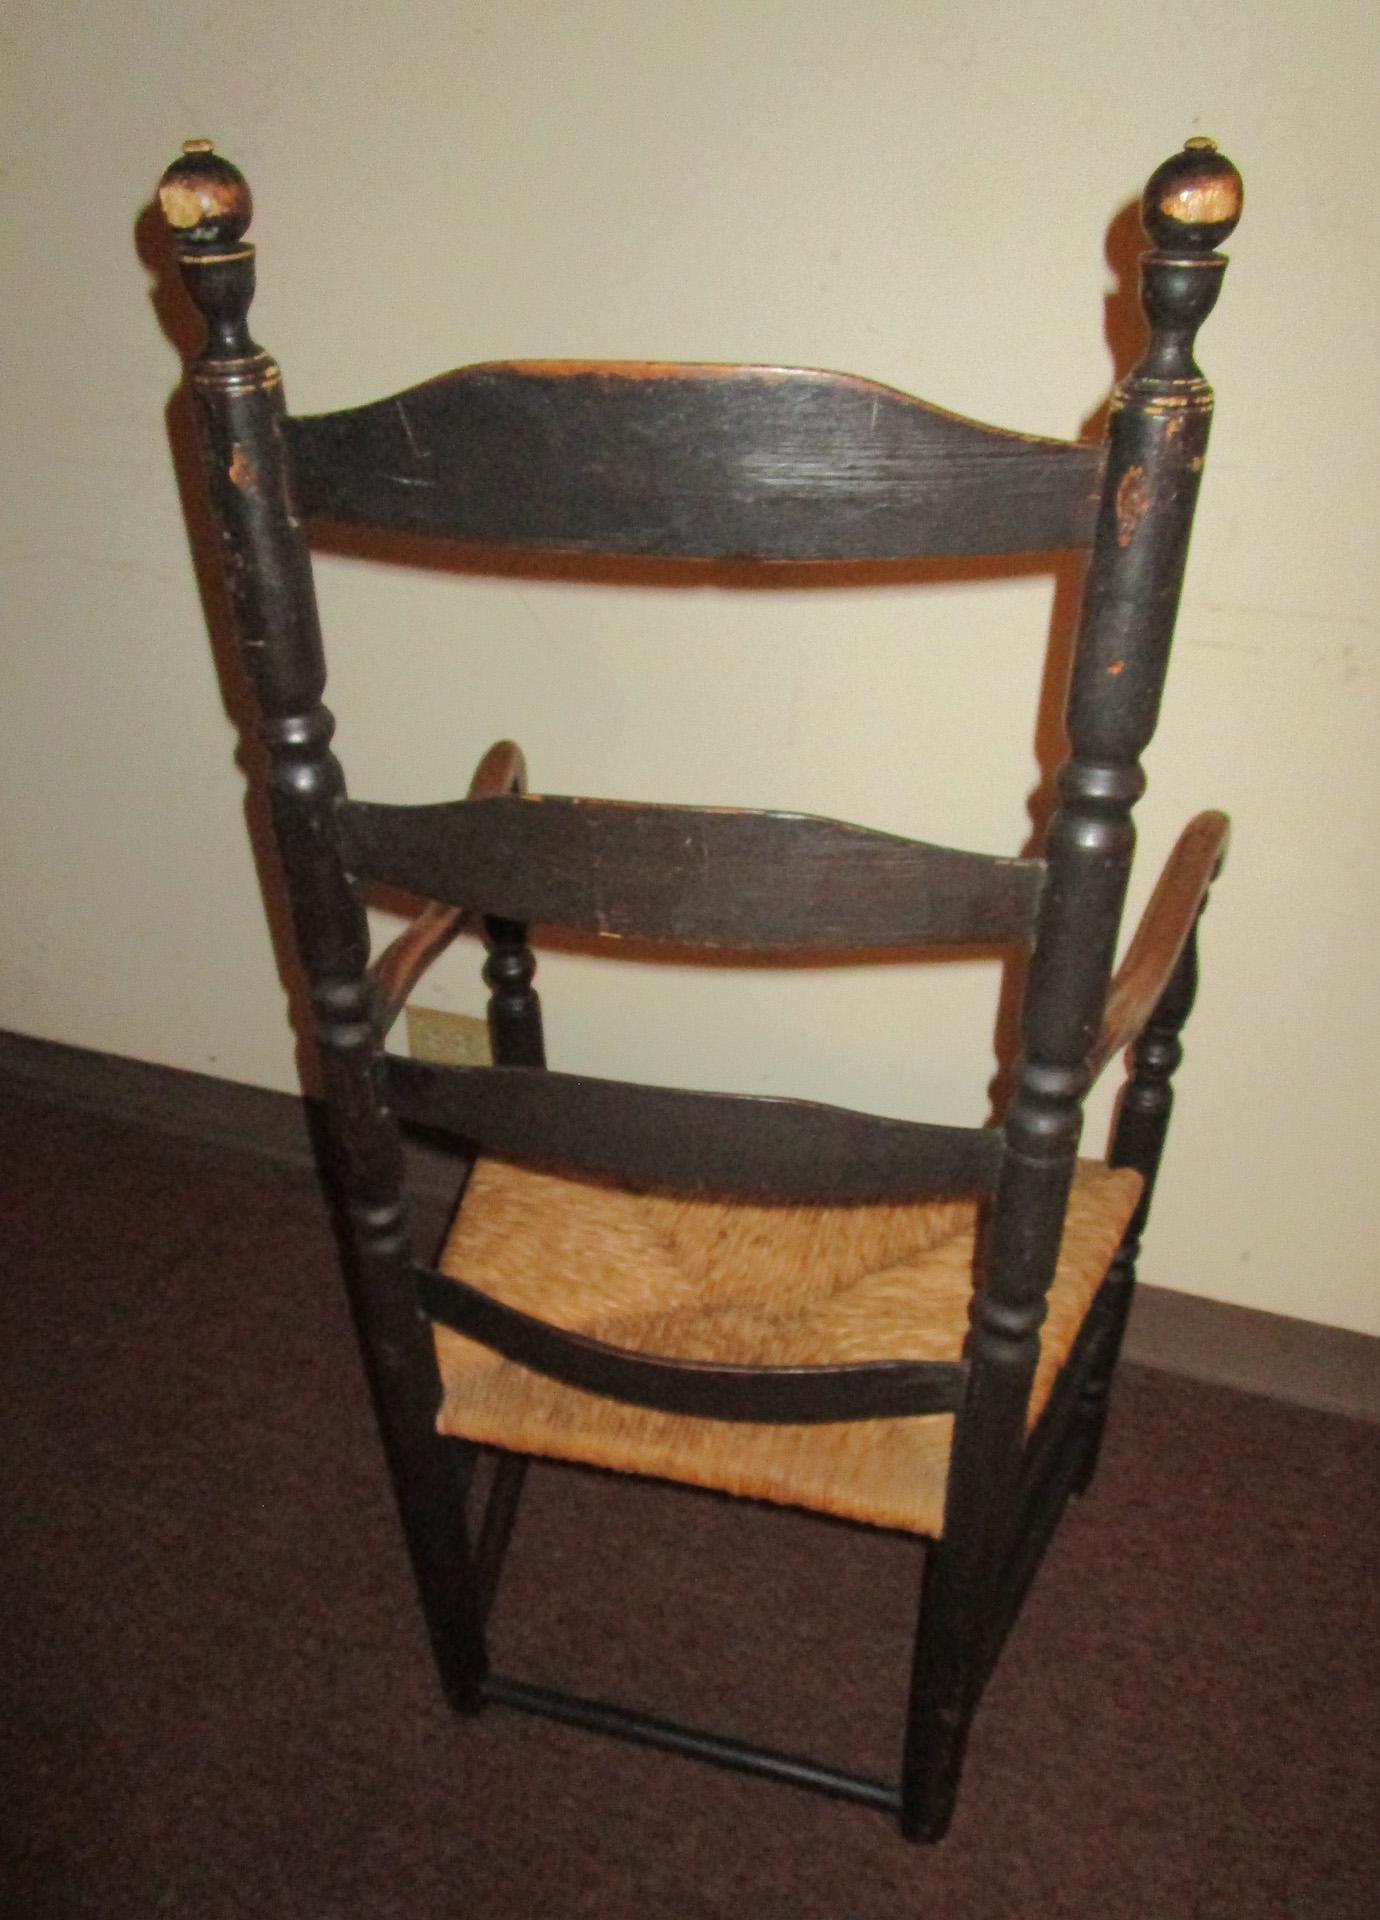 18thc American Stenciled Ladderback Chair with Rush Seat and Original Finish For Sale 3